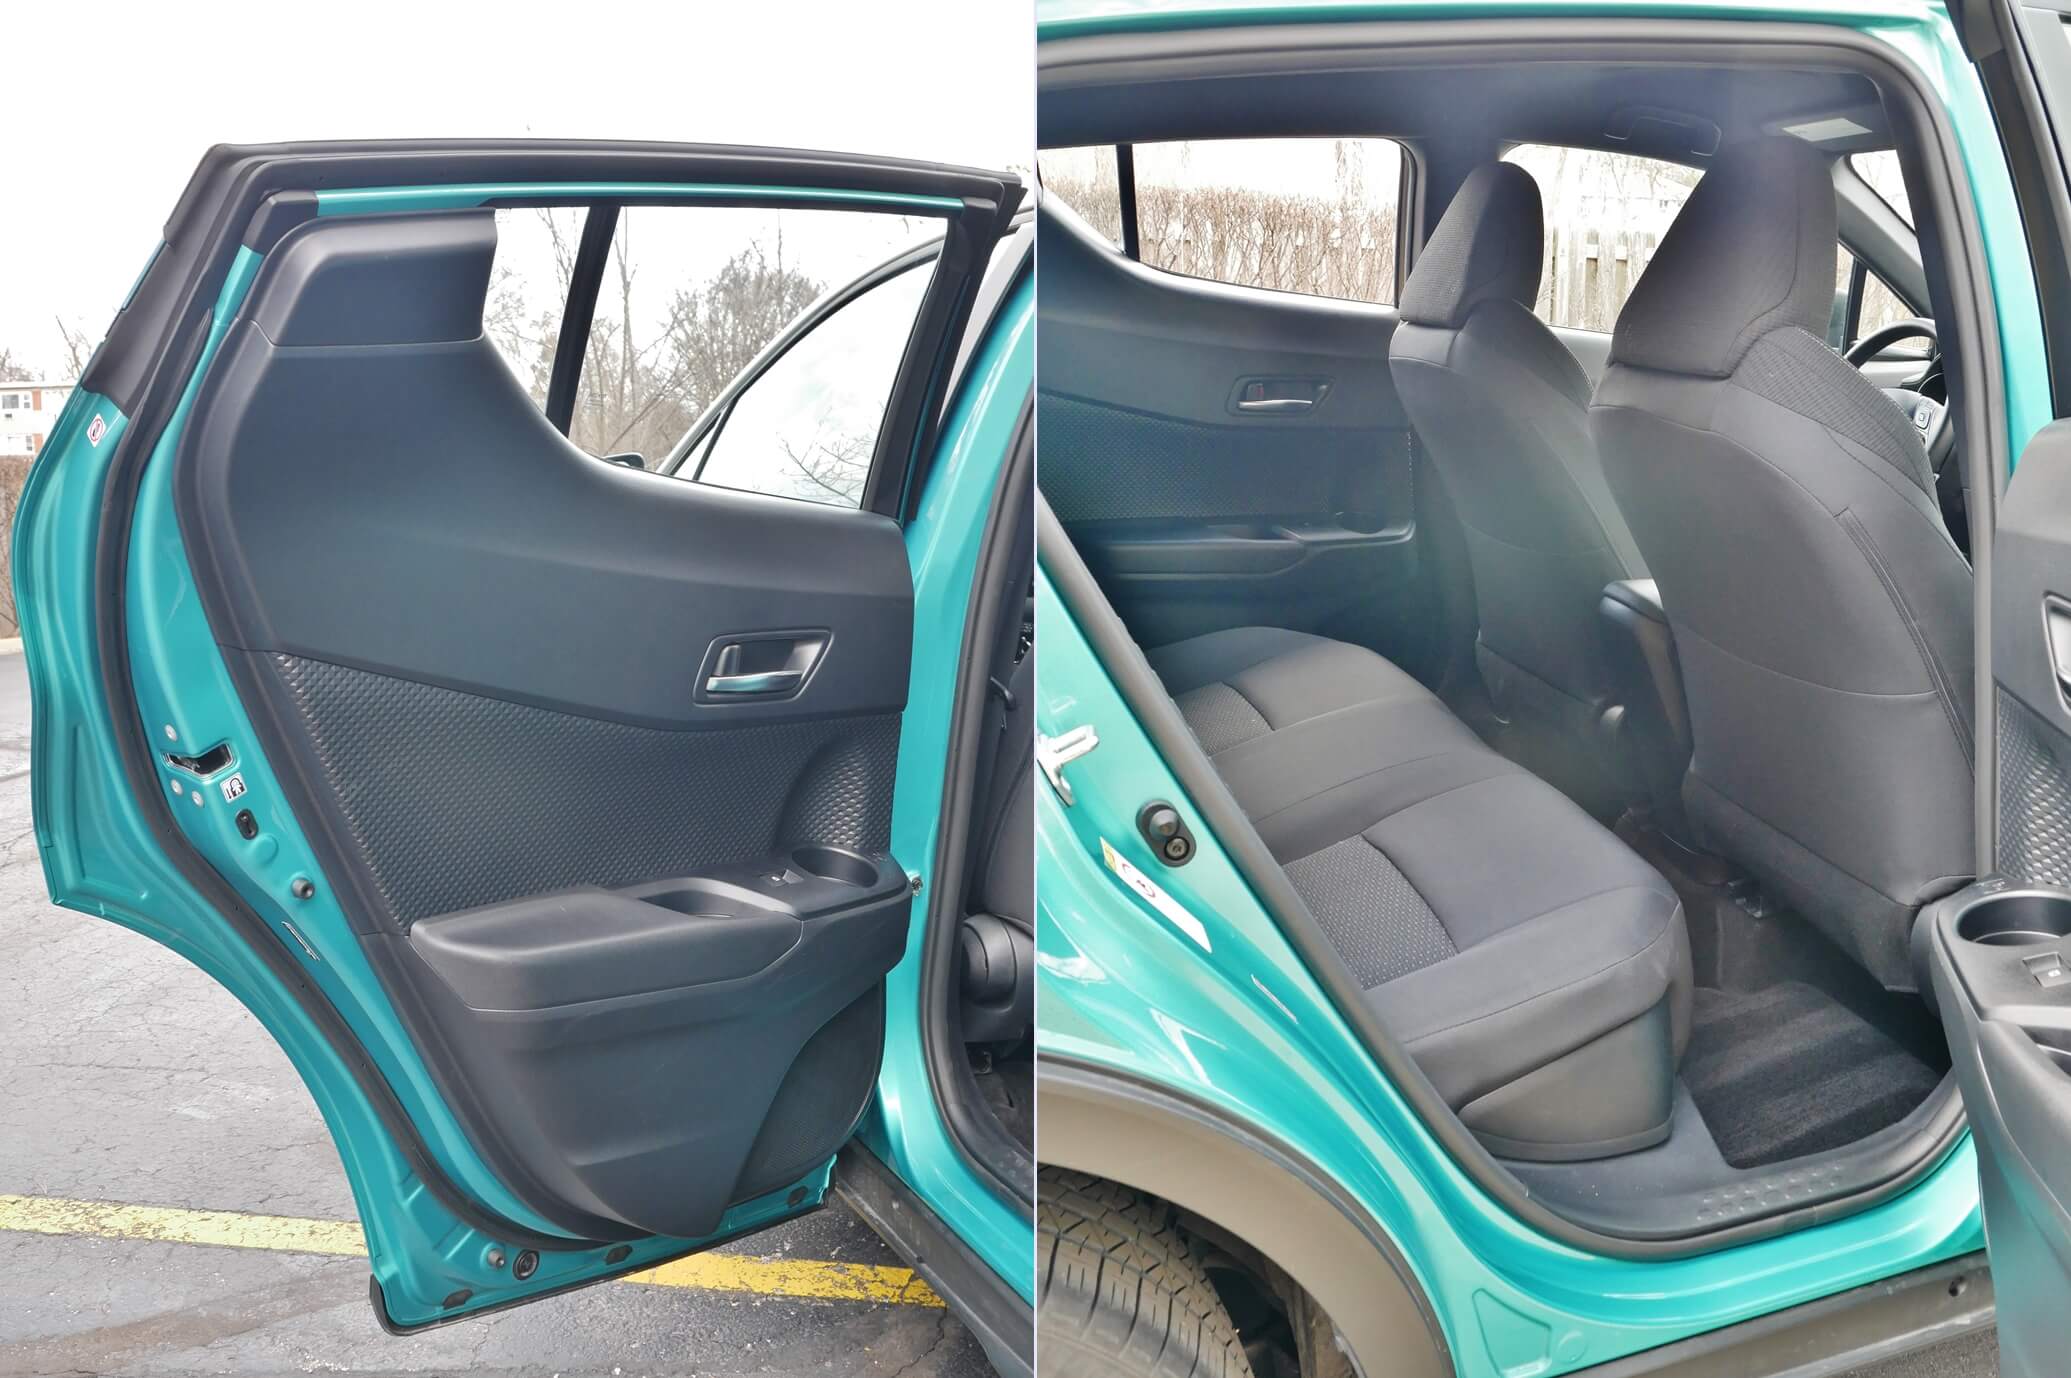 2018 Toyota C-HR XLE: Row 2 entry featuring high rising towards rear panel, but limited door pocket storage